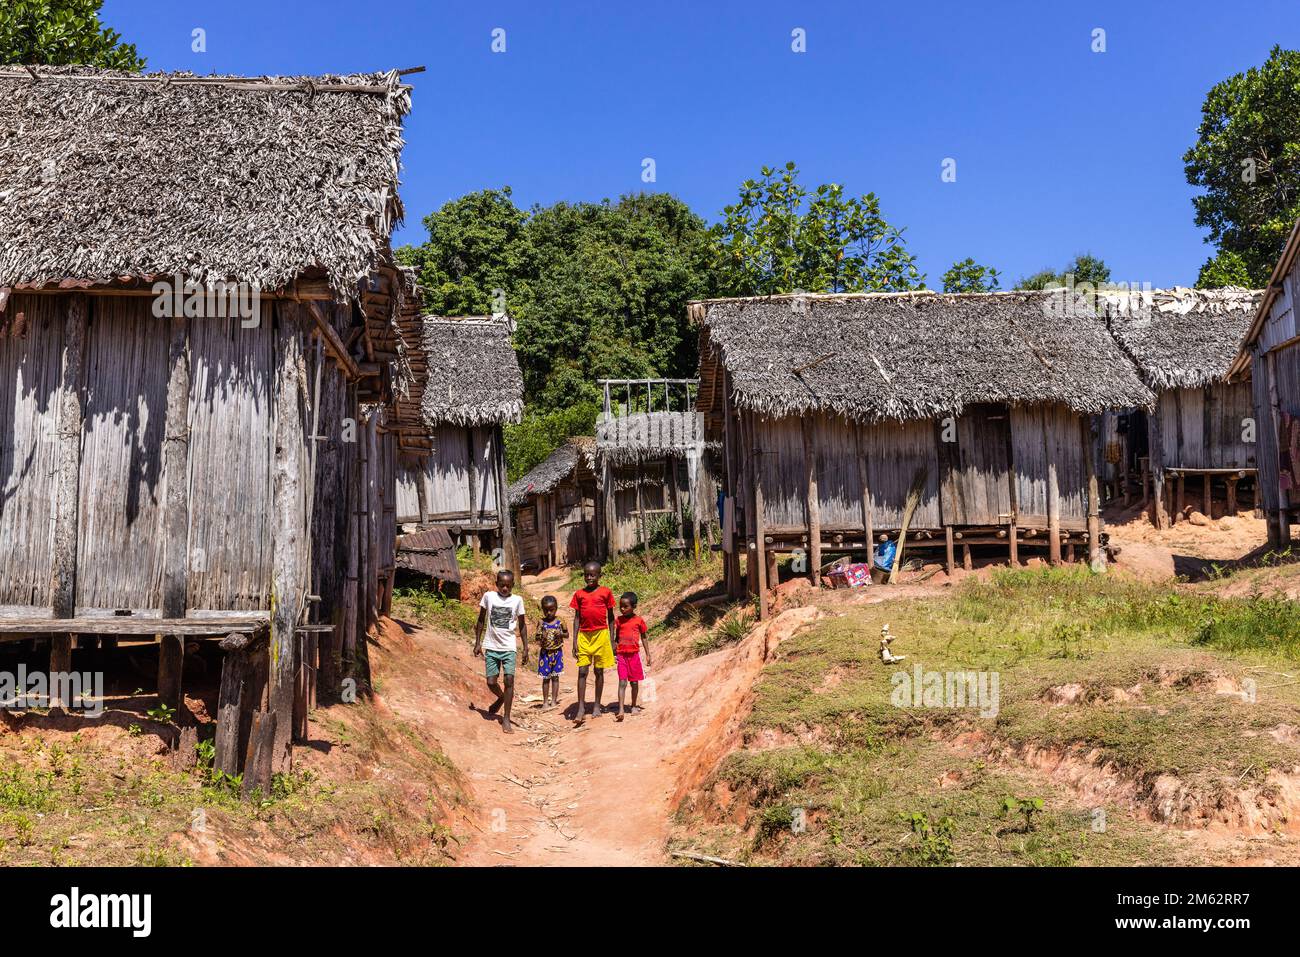 School children coming home after school in Ampahantany traditional village, Madagascar, Africa Stock Photo